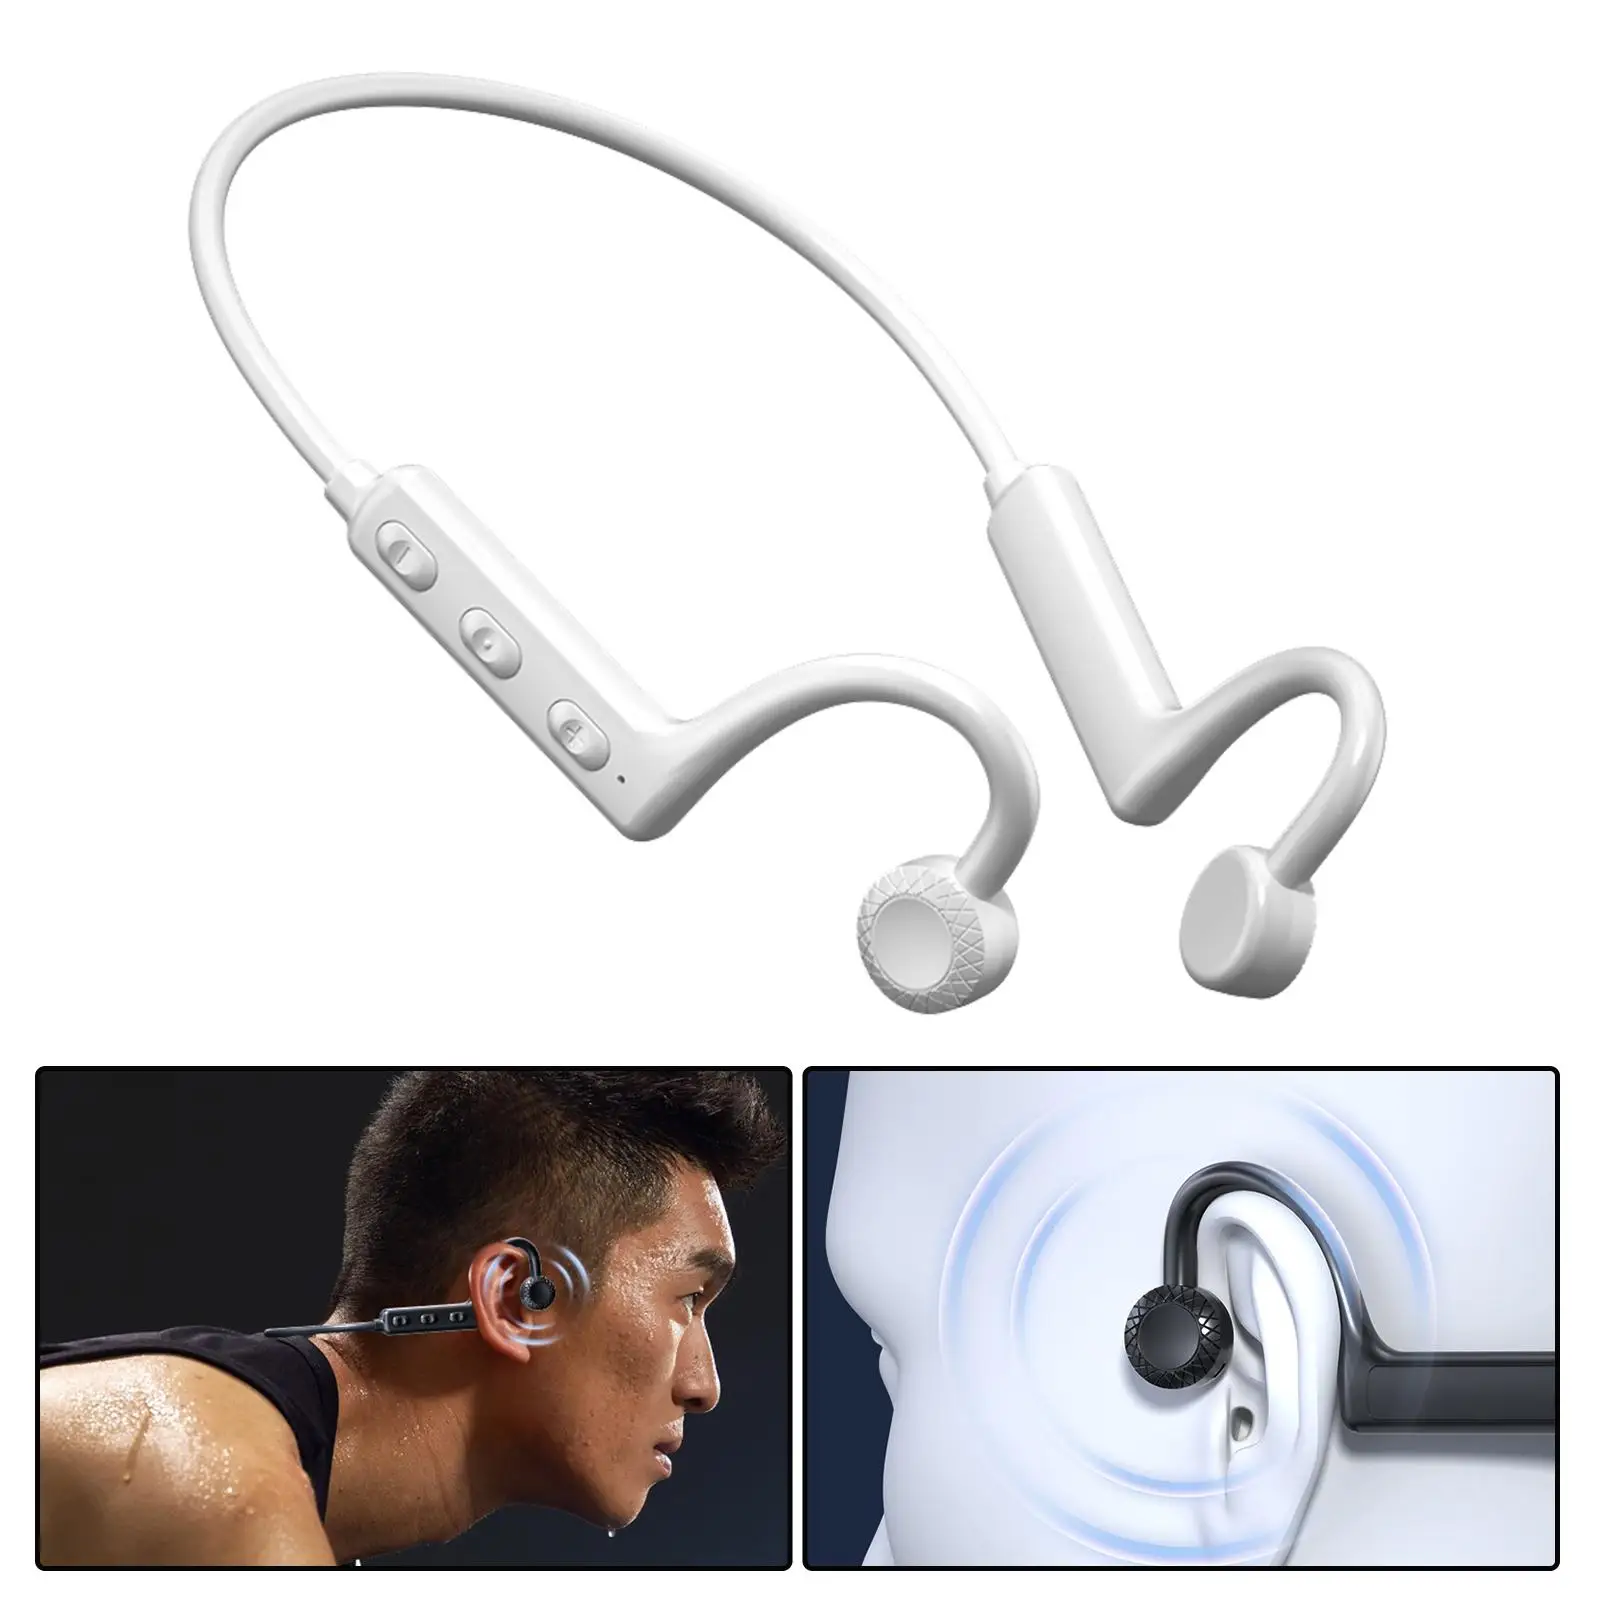 Bone Conduction Headphones Sweat Resistant Open Ear Headset for Running Workout Sports